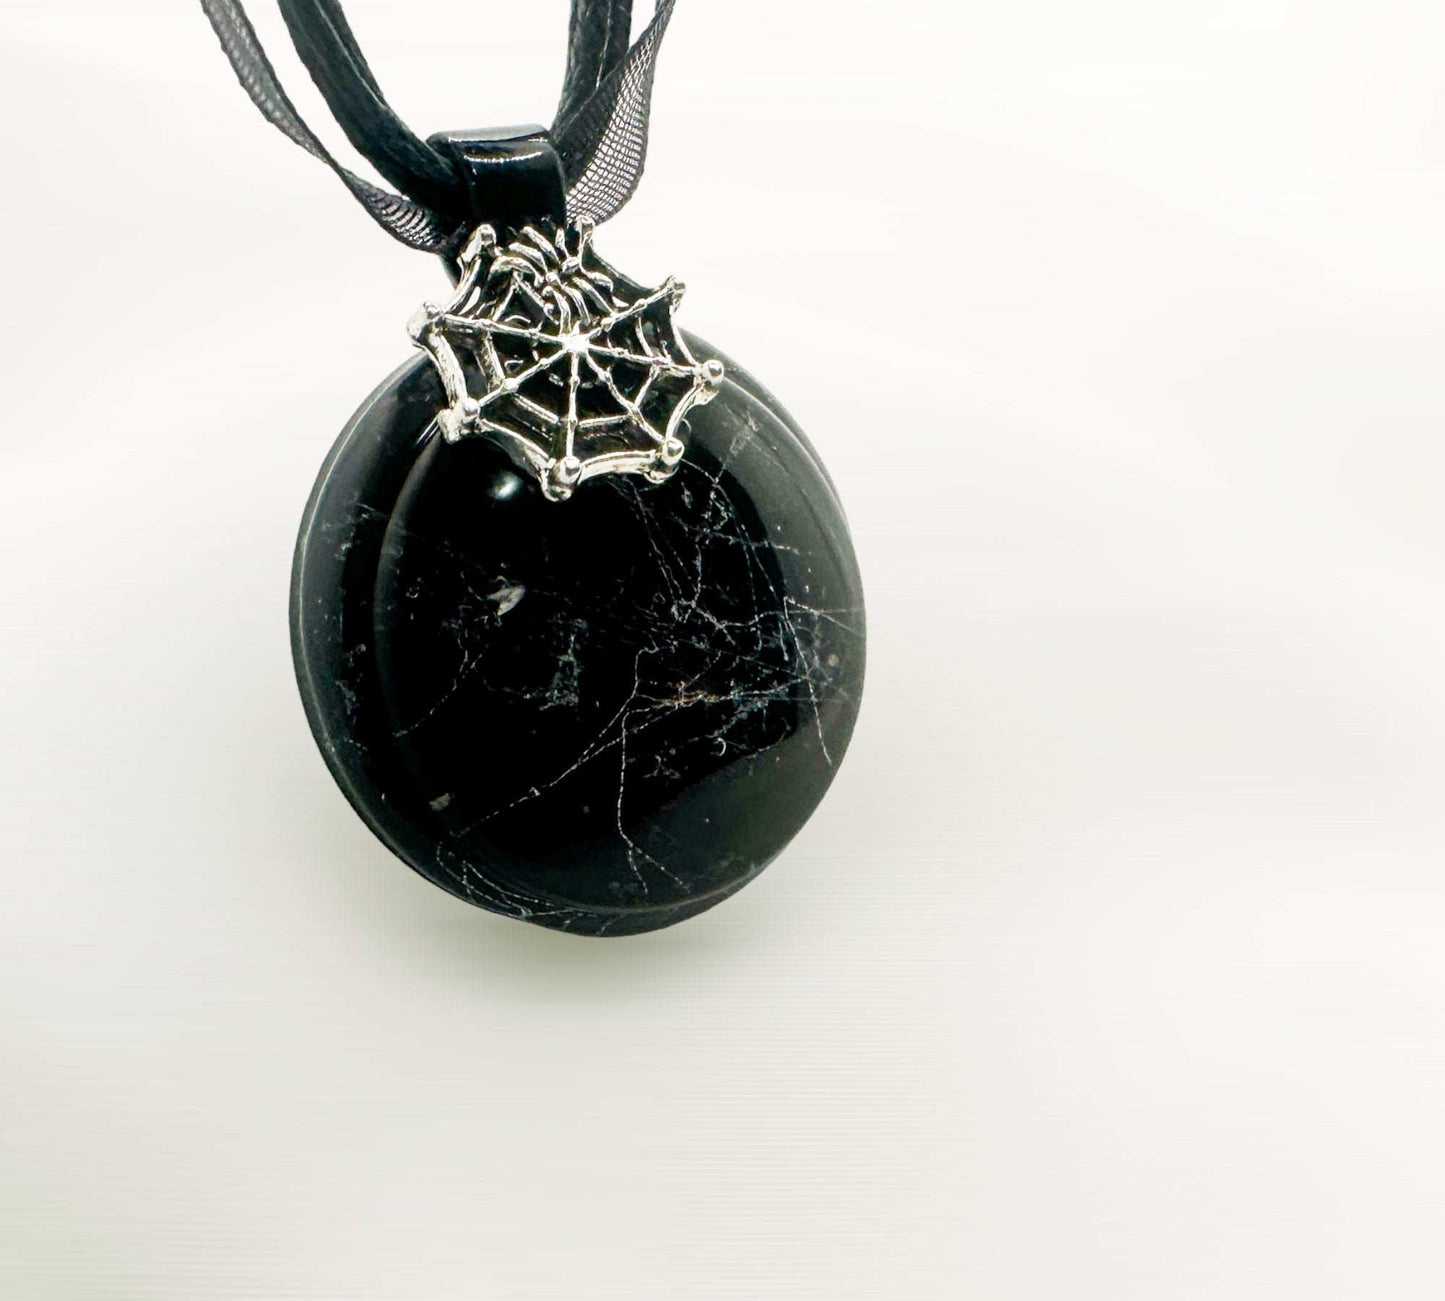 Spiderweb-Inspired Resin Pendant Necklace - Nature's Beauty on Display